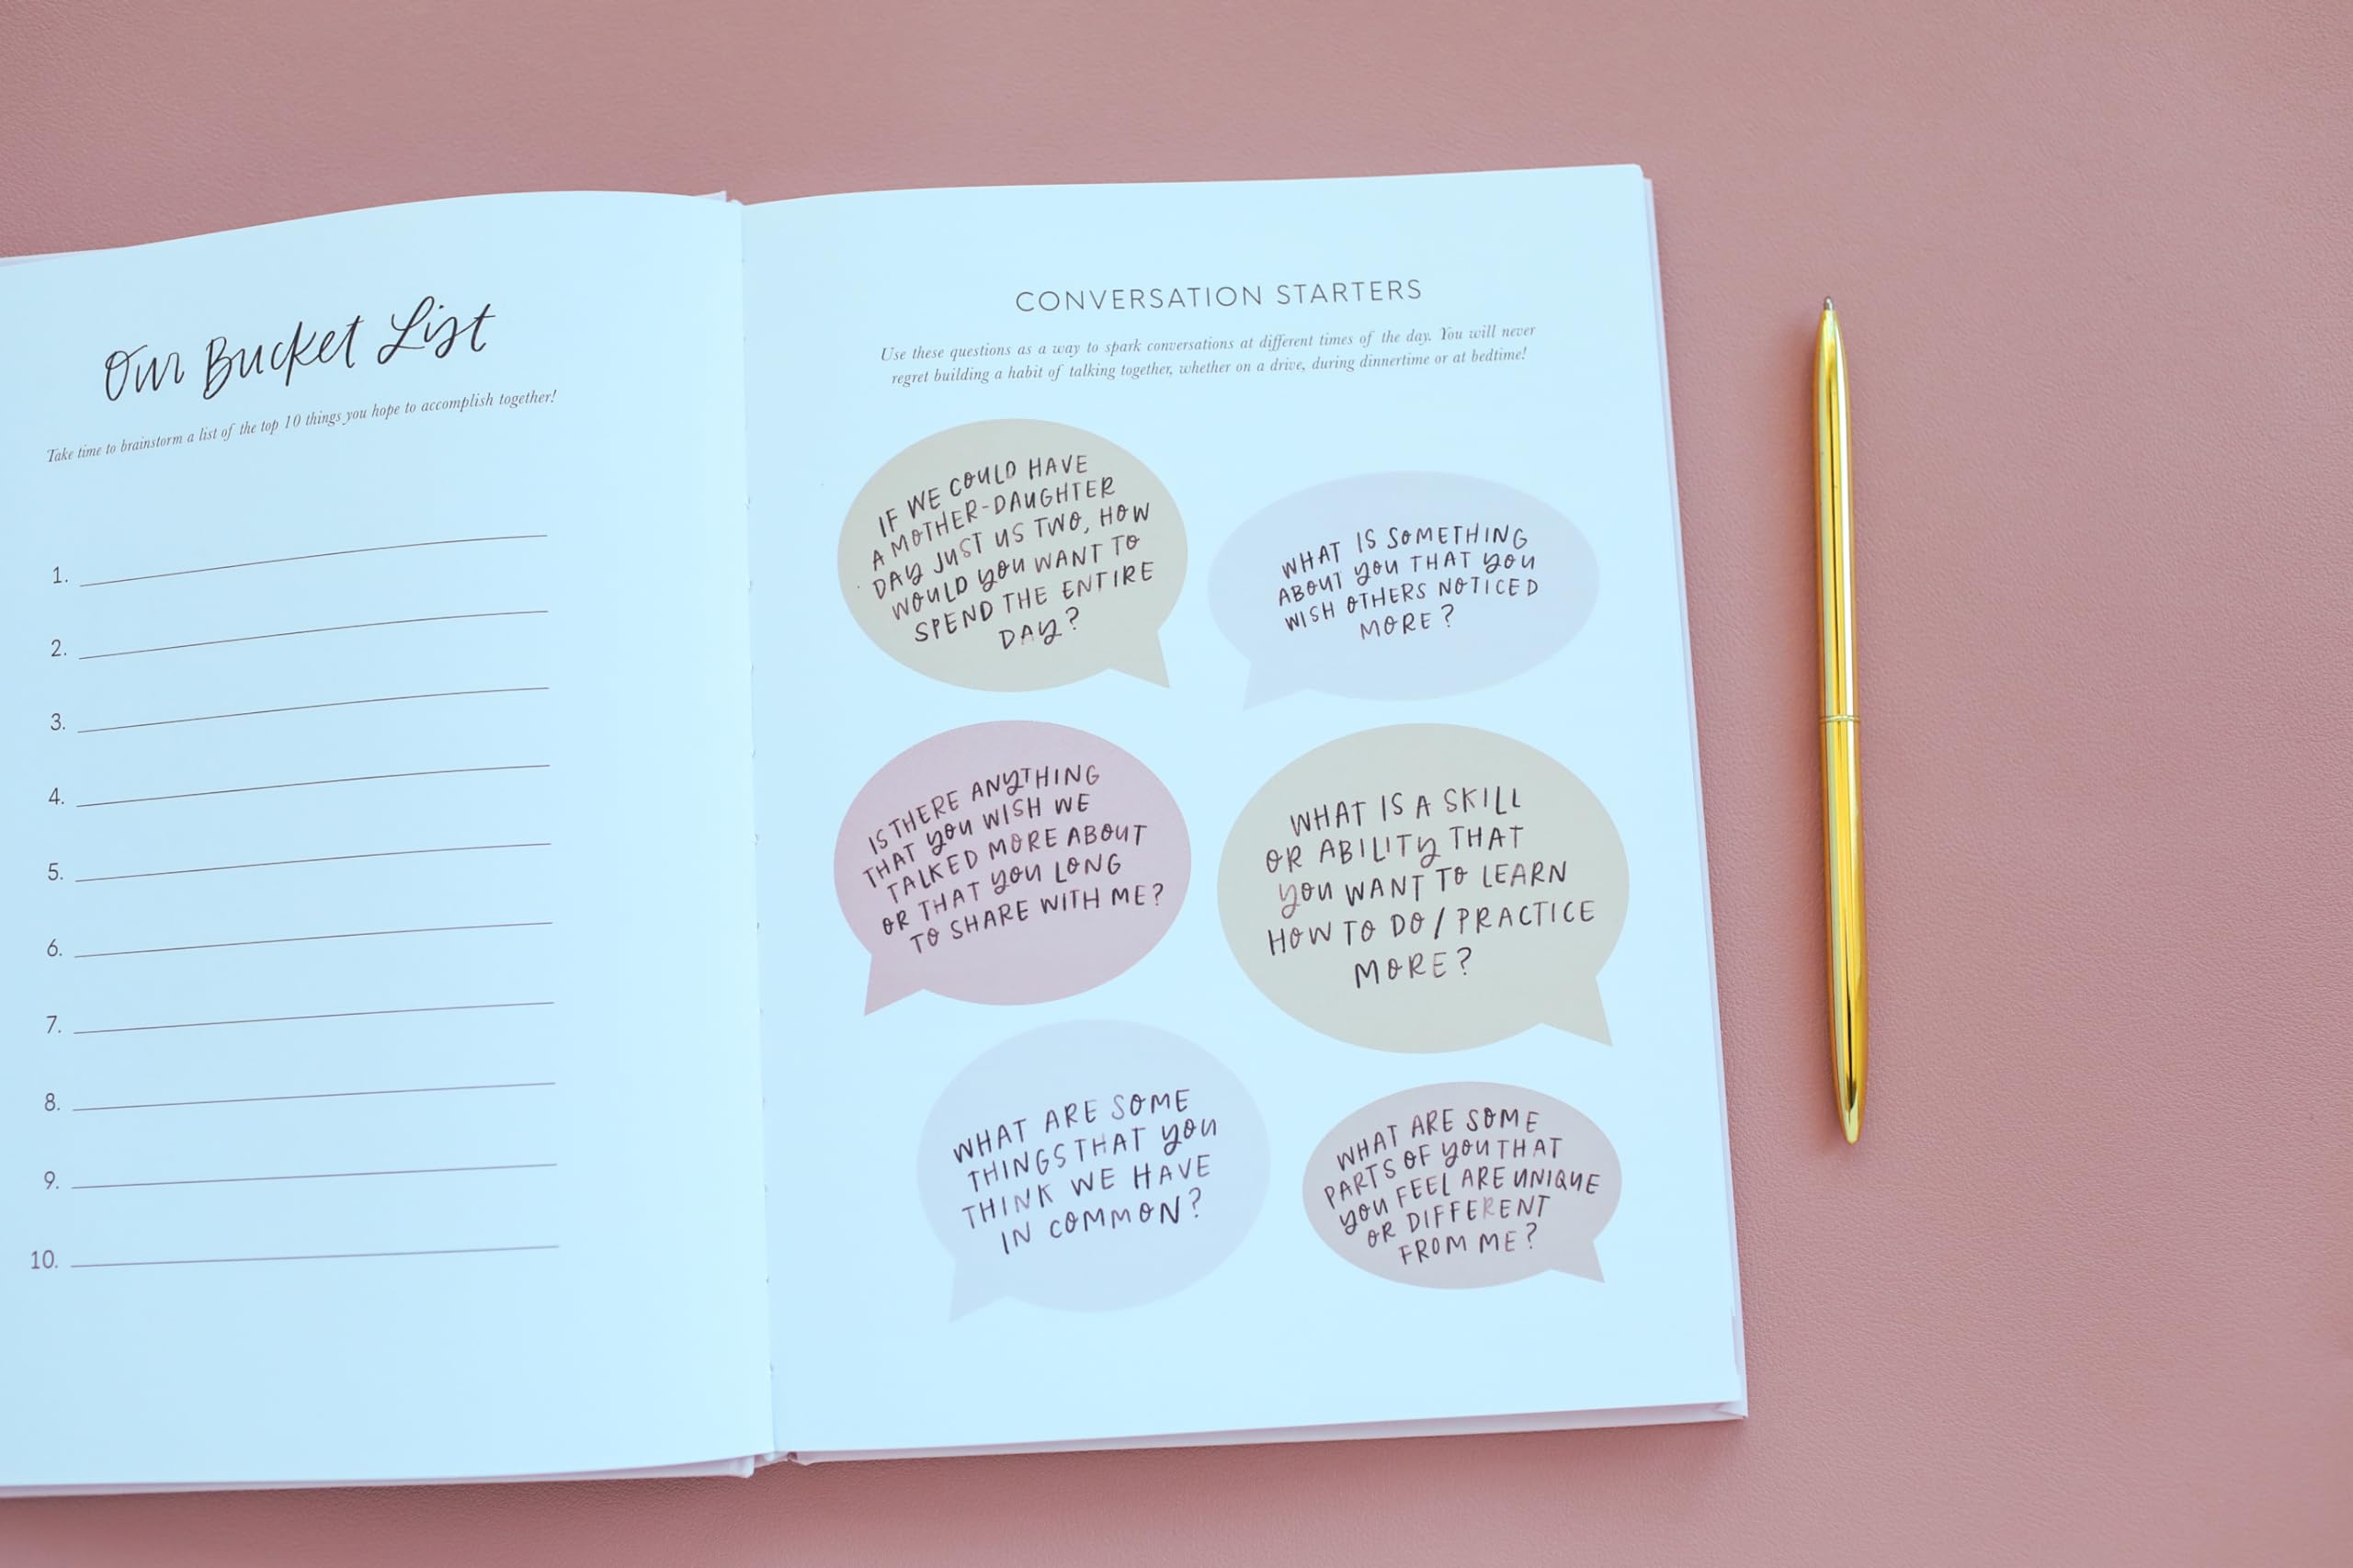 Heart to Heart: Mother Daughter Journal: Create Memories and Meaningful Connection | Thoughtful Writing Prompts, Between Us Activities and Removable Lunch Box Cards